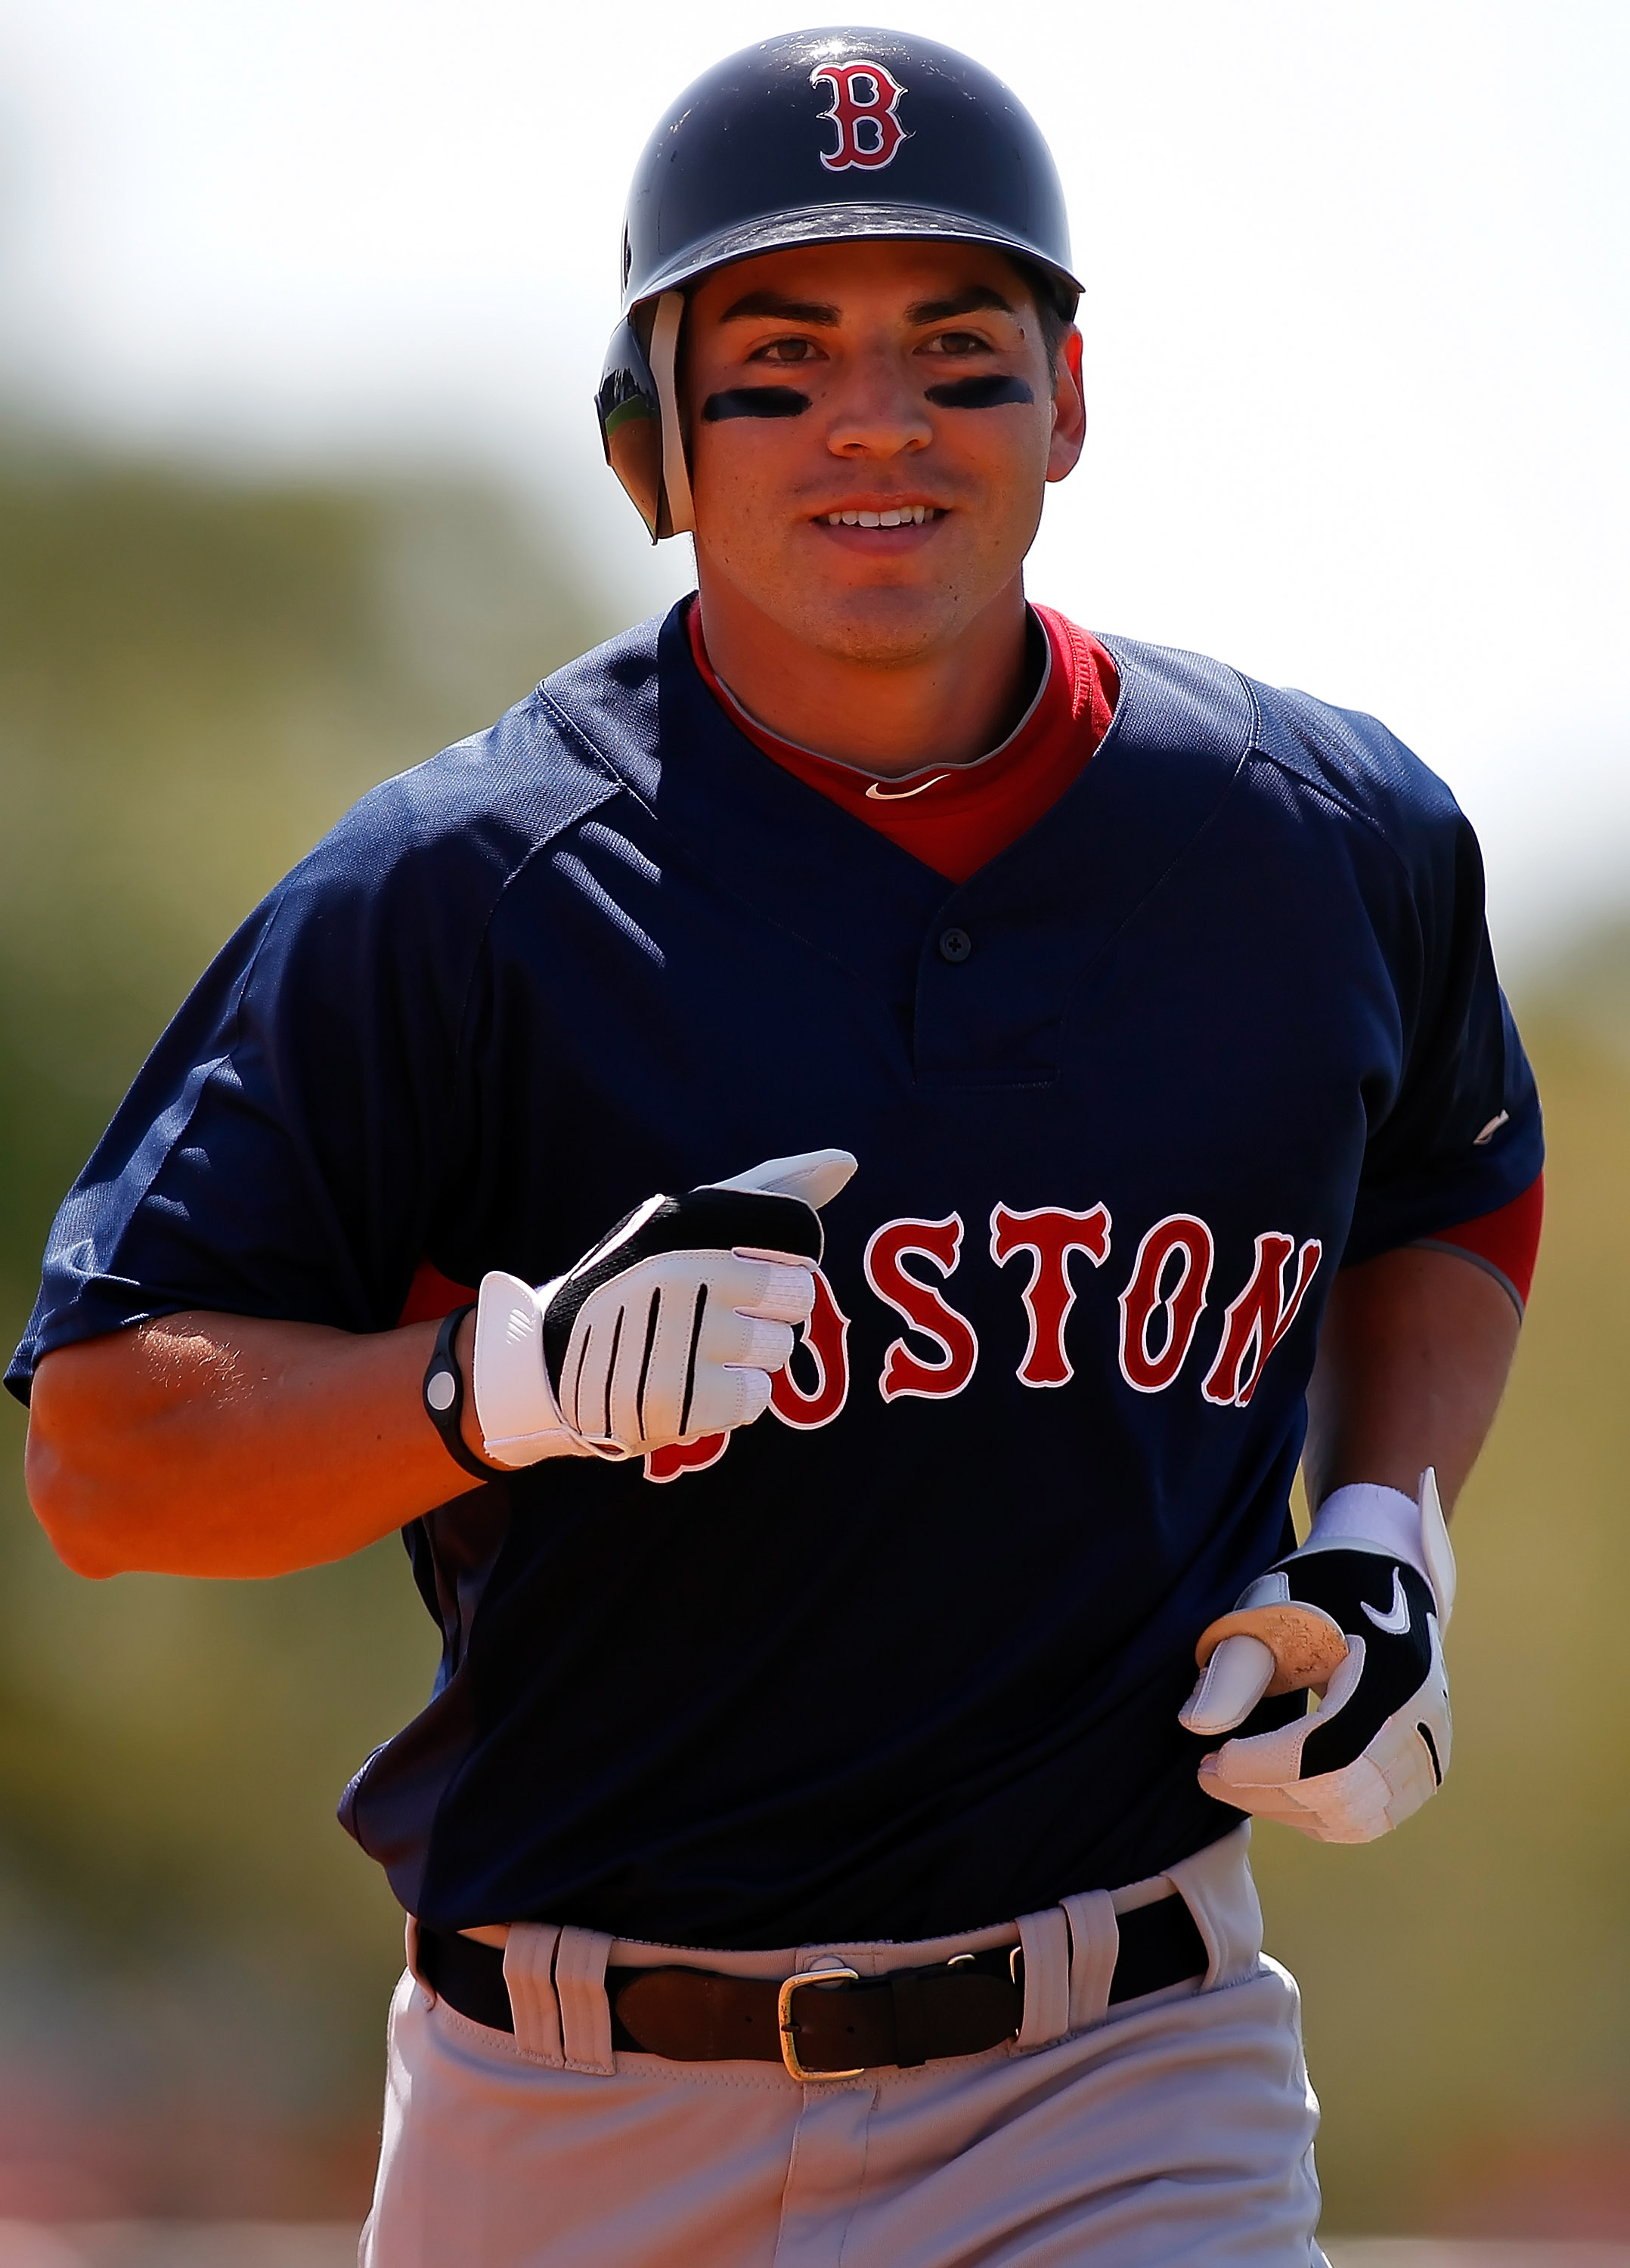 Red Sox outfielder Jacoby ELLSBURY is scheduled to have his ribs ...